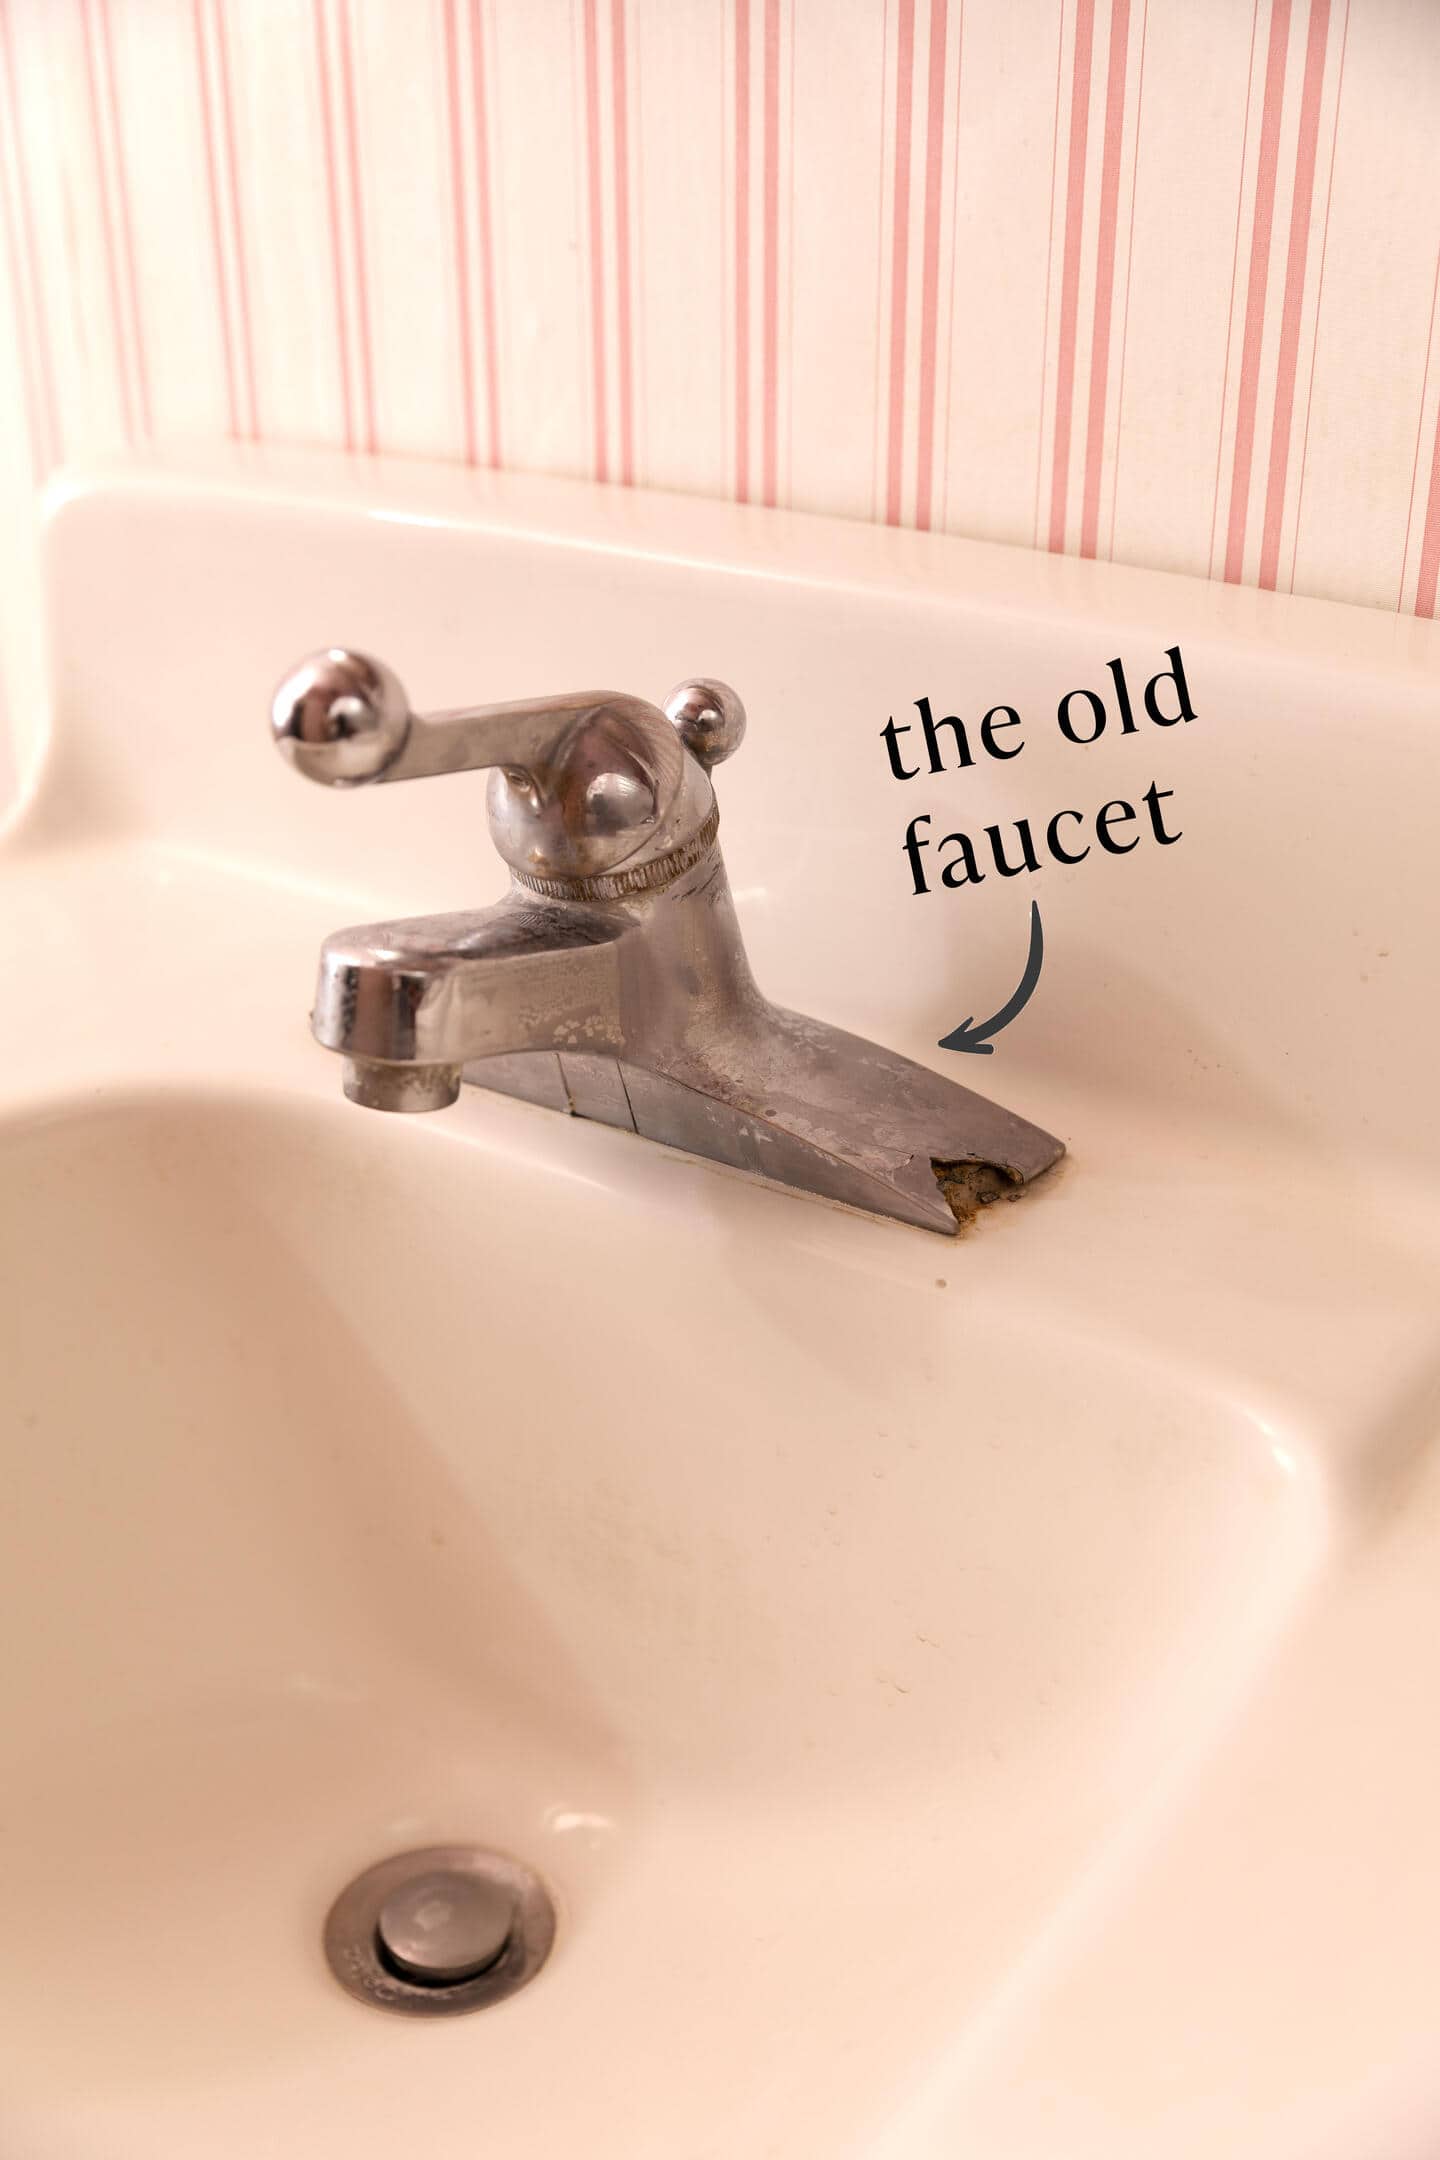 Close-up of the old faucet.